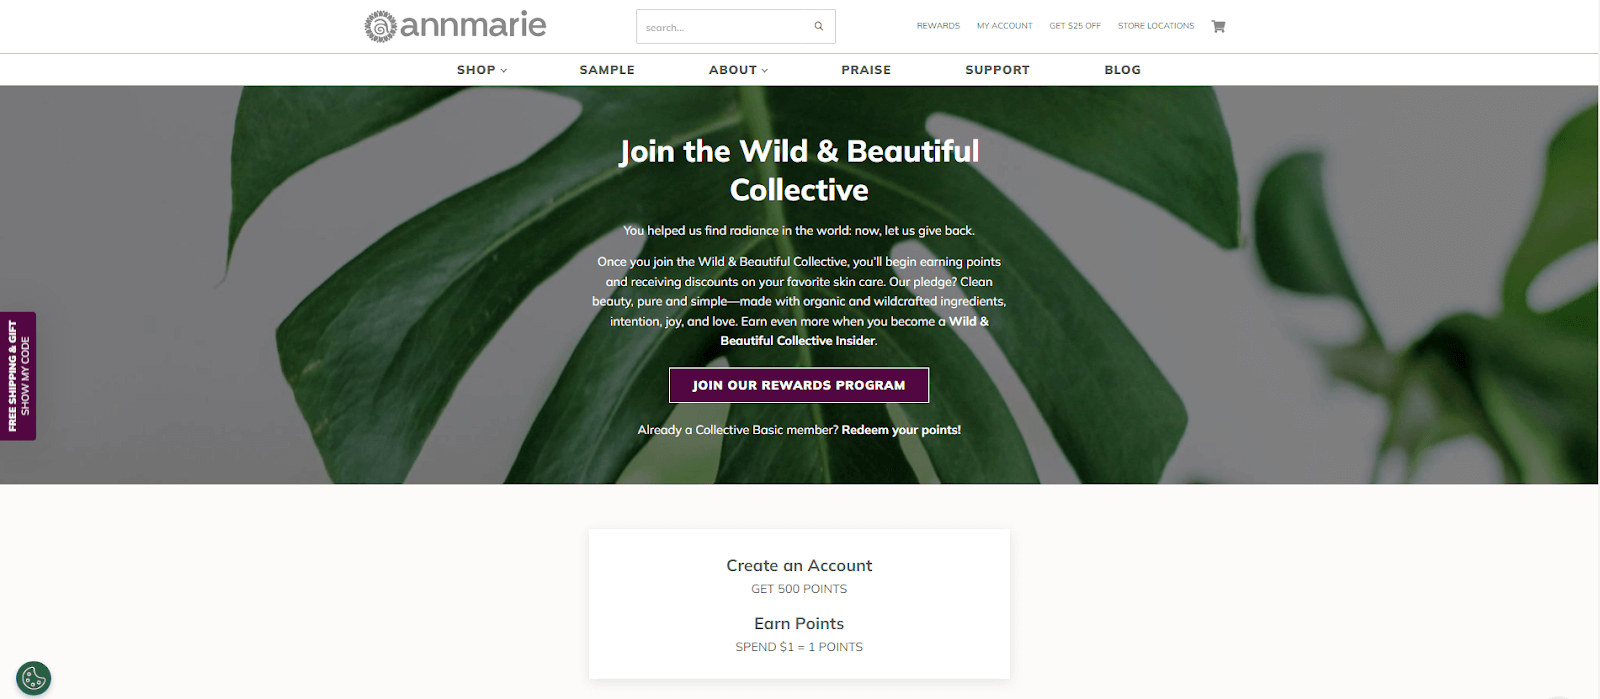 Annmarie  loyalty program landing page intro (1)